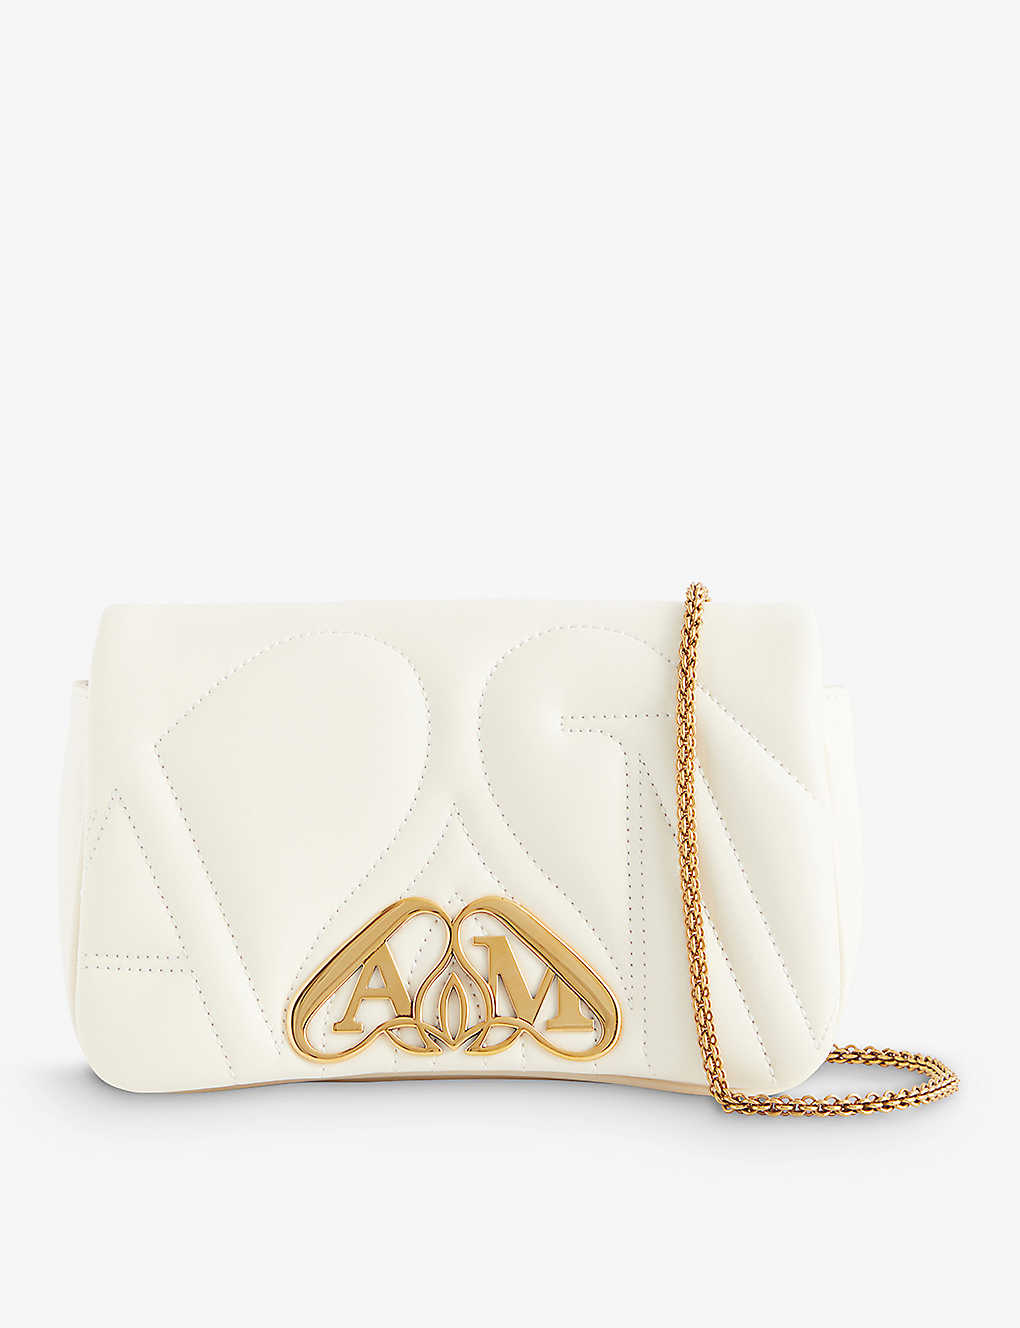 Alexander Mcqueen Womens Soft Ivory The Seal Mini Leather Shoulder Bag